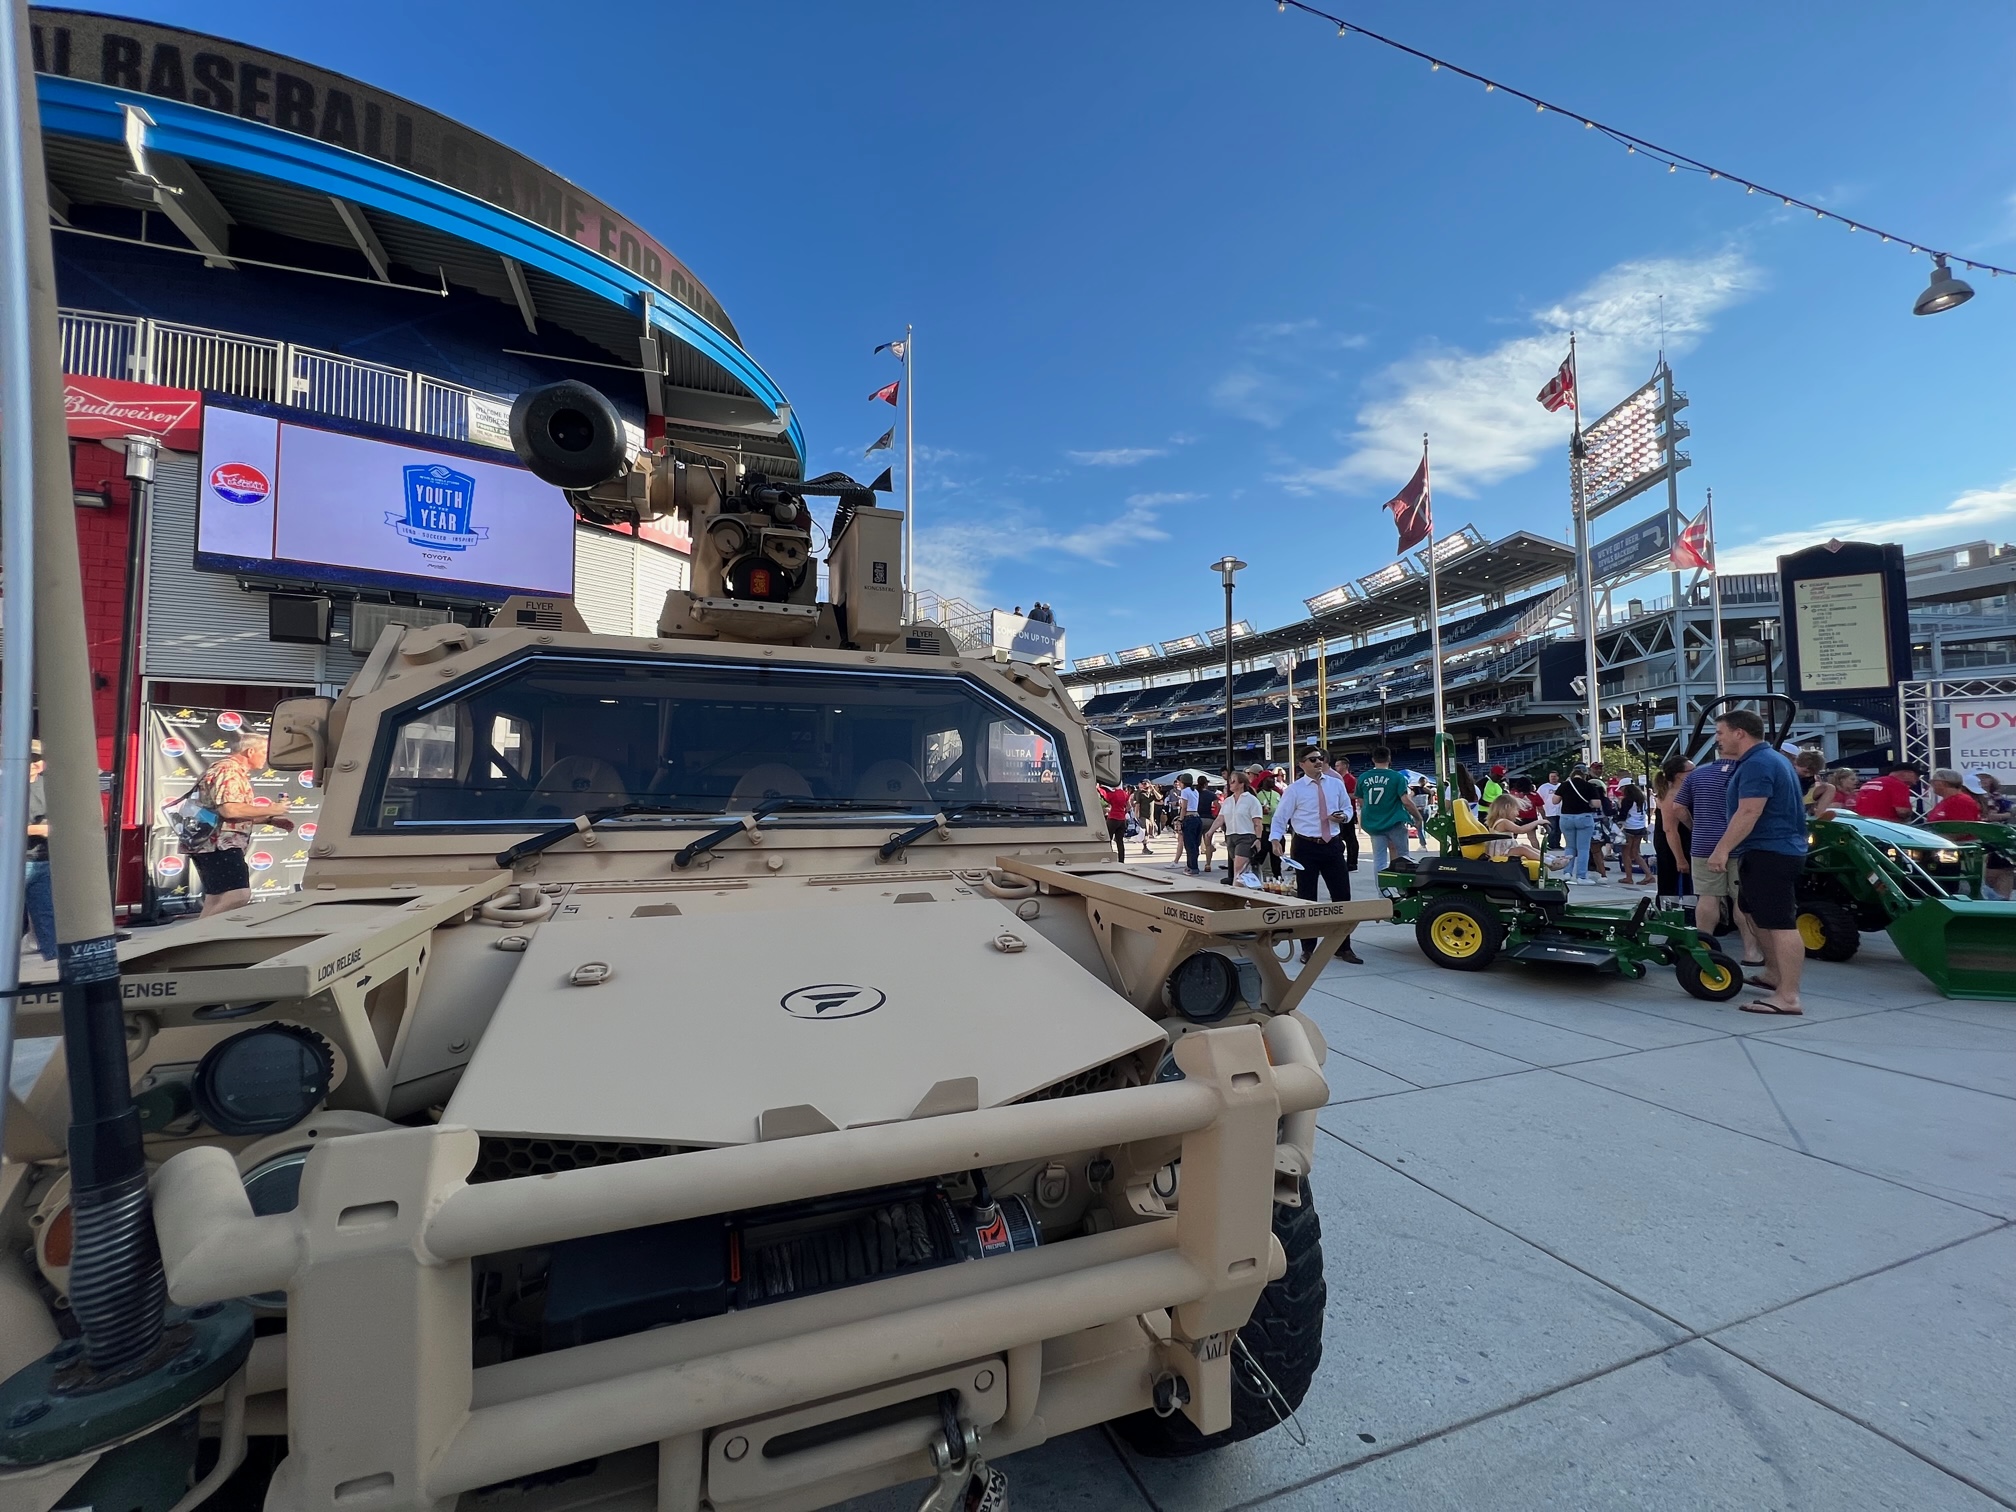 Flyer Vehicle Front and Center at Annual Congressional Baseball Game for Charity